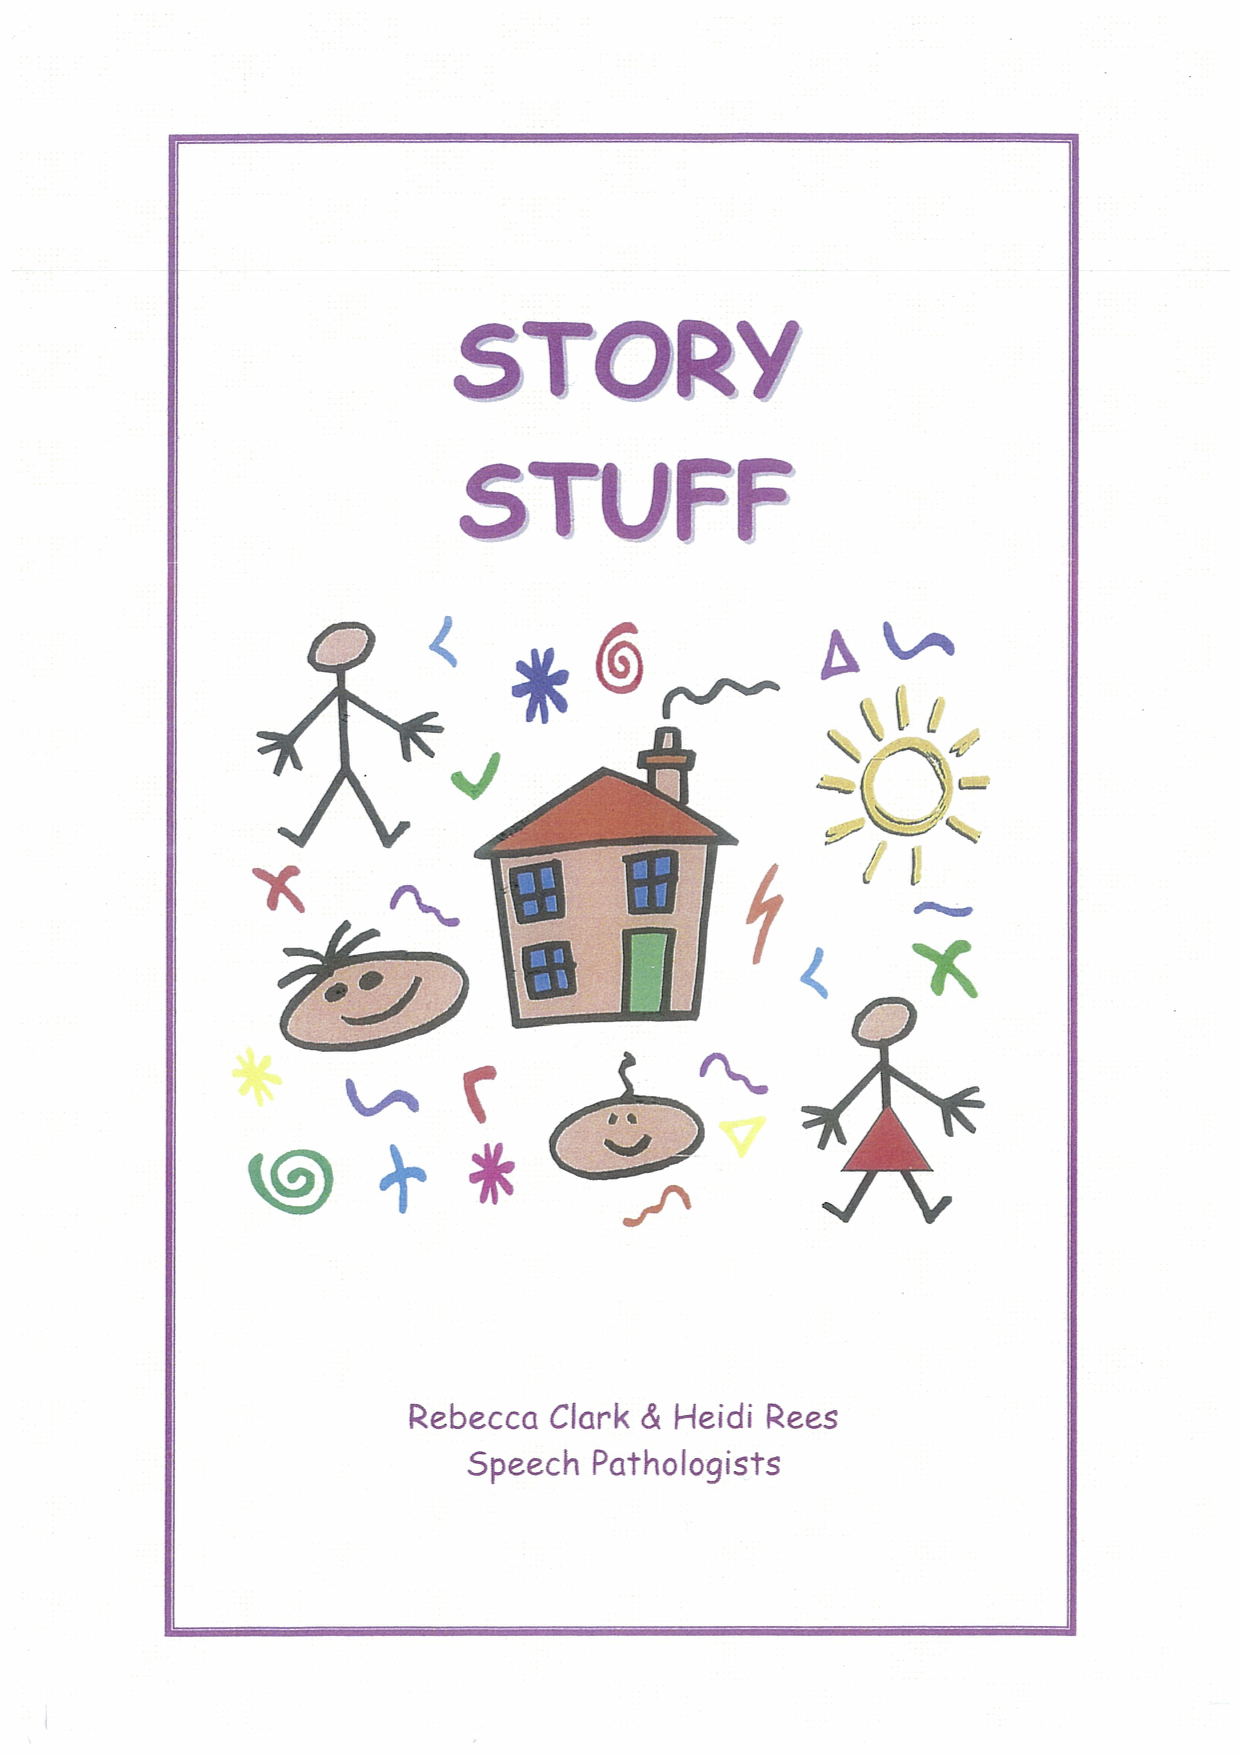 Story Stuff - book for oral and written narrative and story telling